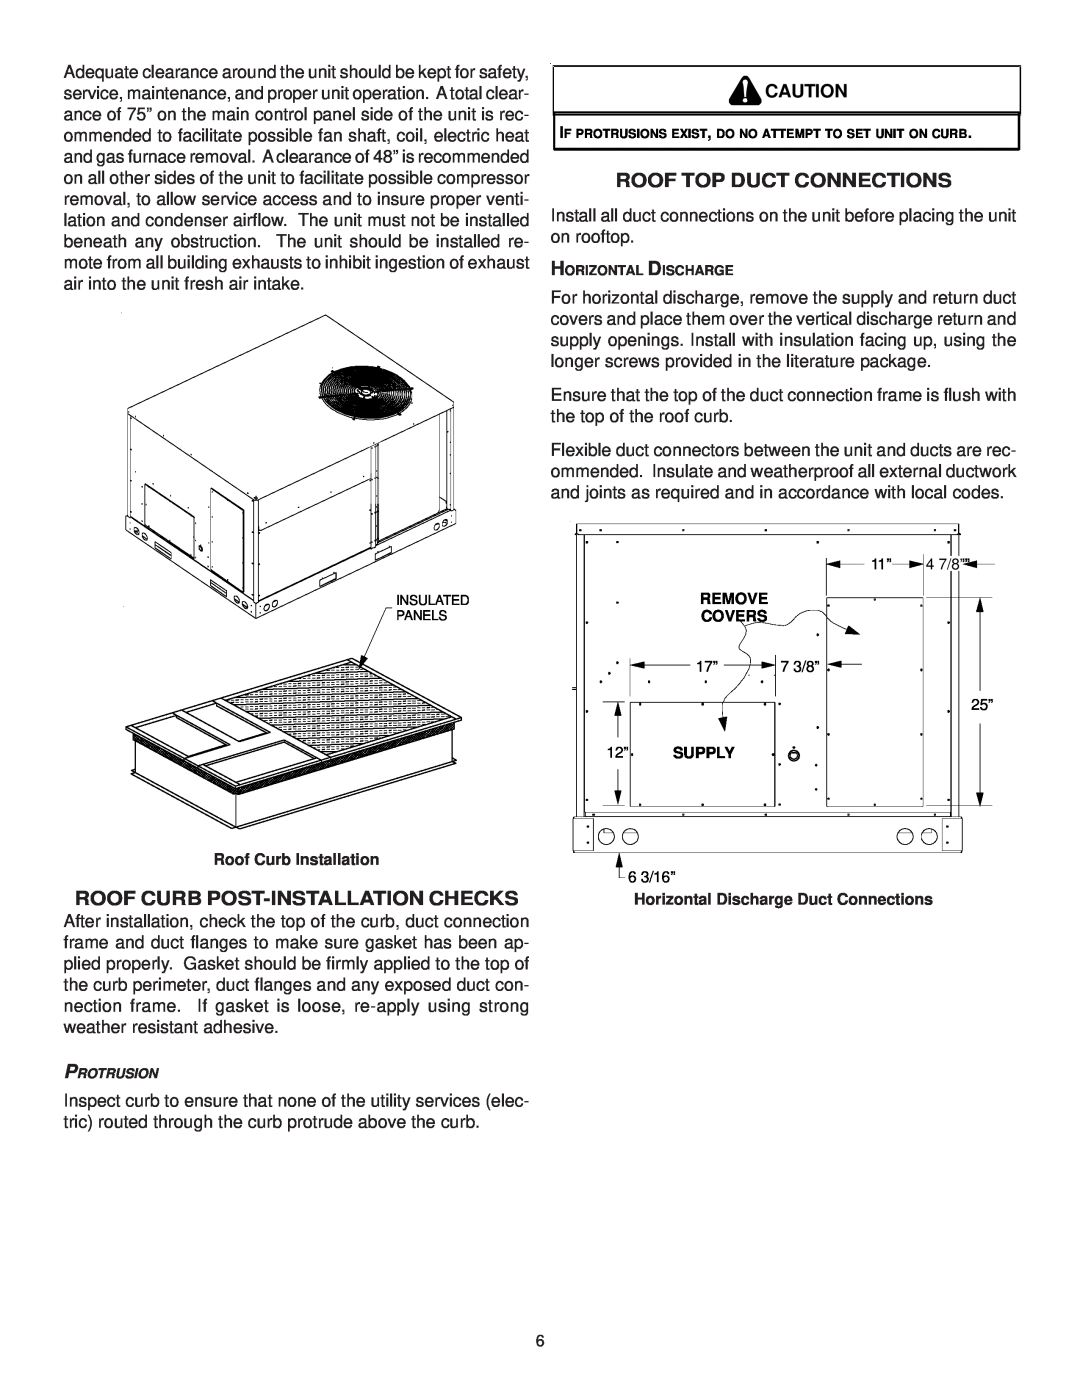 Goodman Mfg CPG SERIES Roof Curb Post-Installationchecks, Roof Top Duct Connections, Roof Curb Installation 